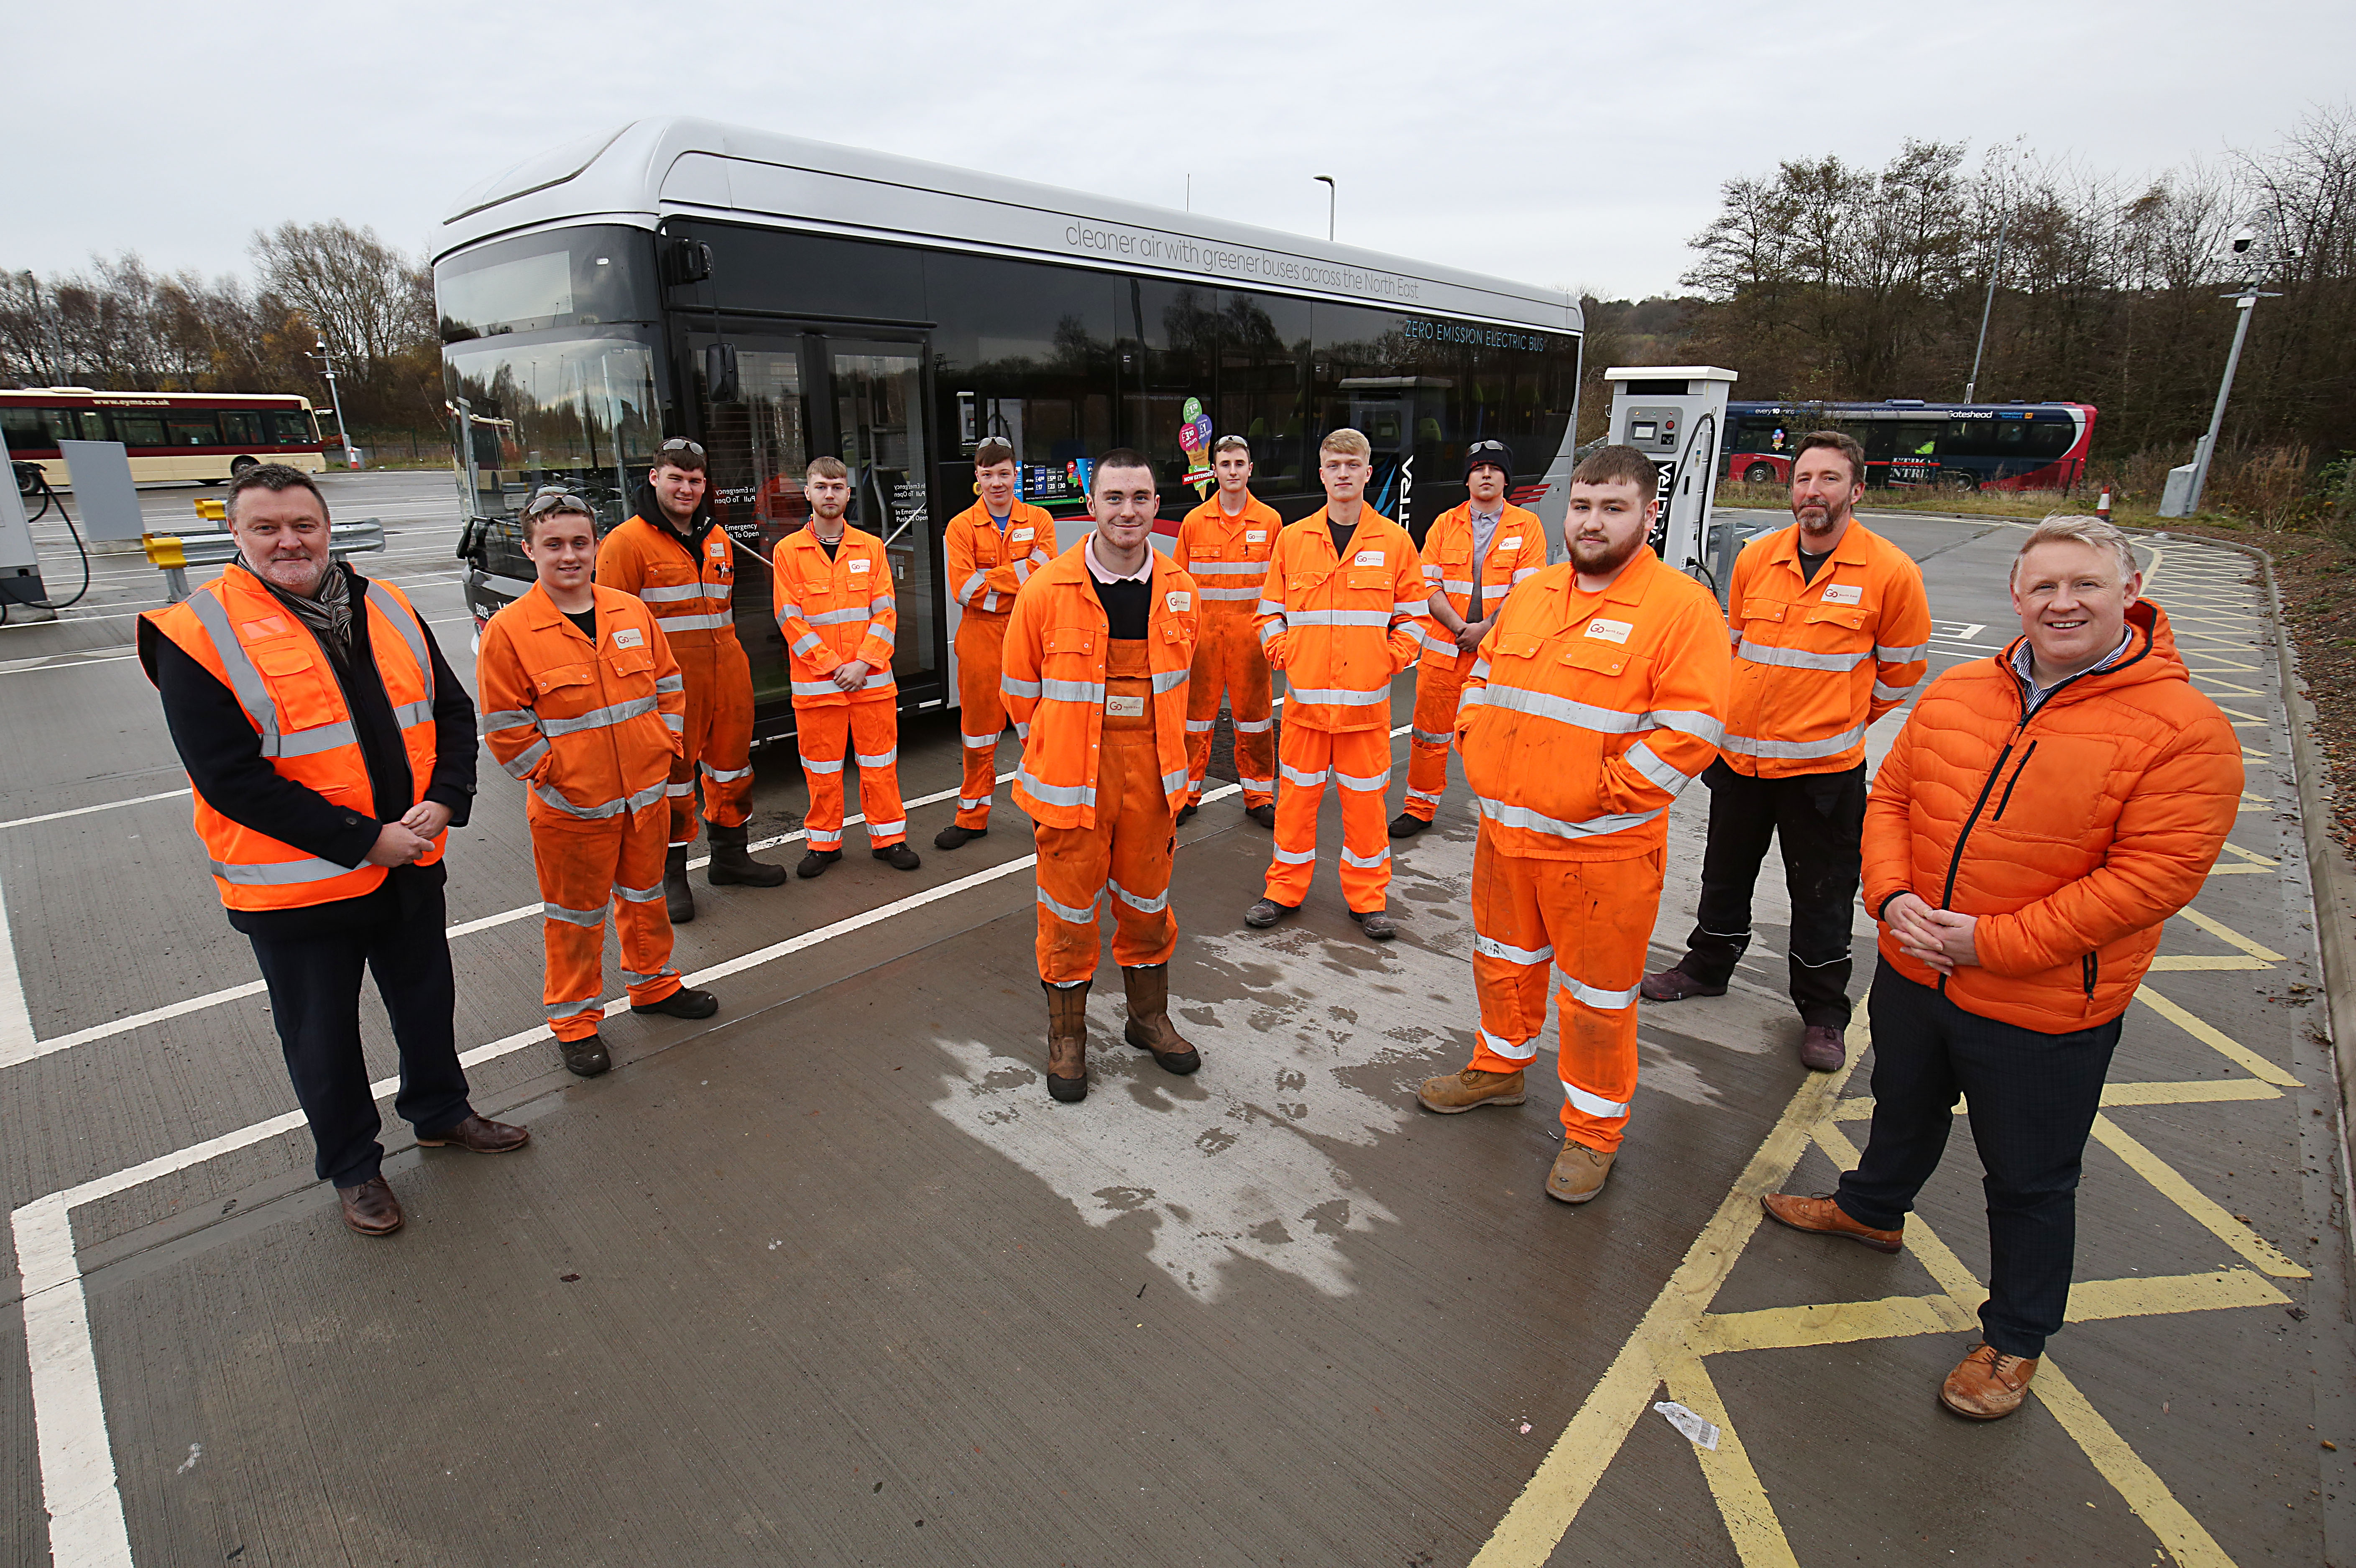 Group of 12 people stood in front of a silver bus all in orange high vis